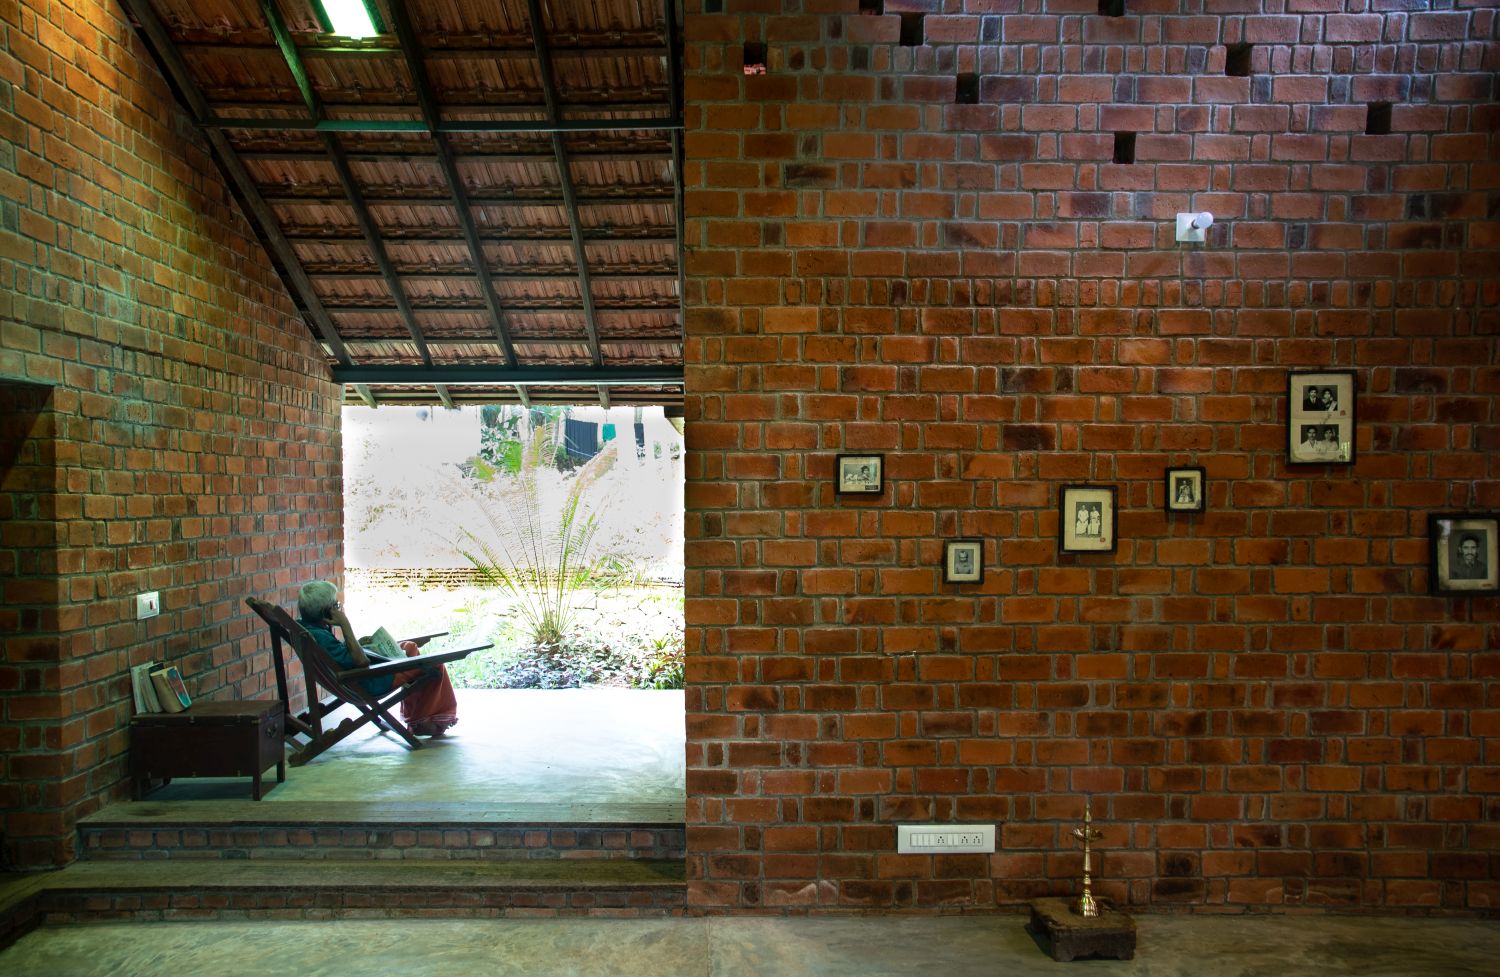 Memories of Objects in Trivandrum. by Fictional Project 18